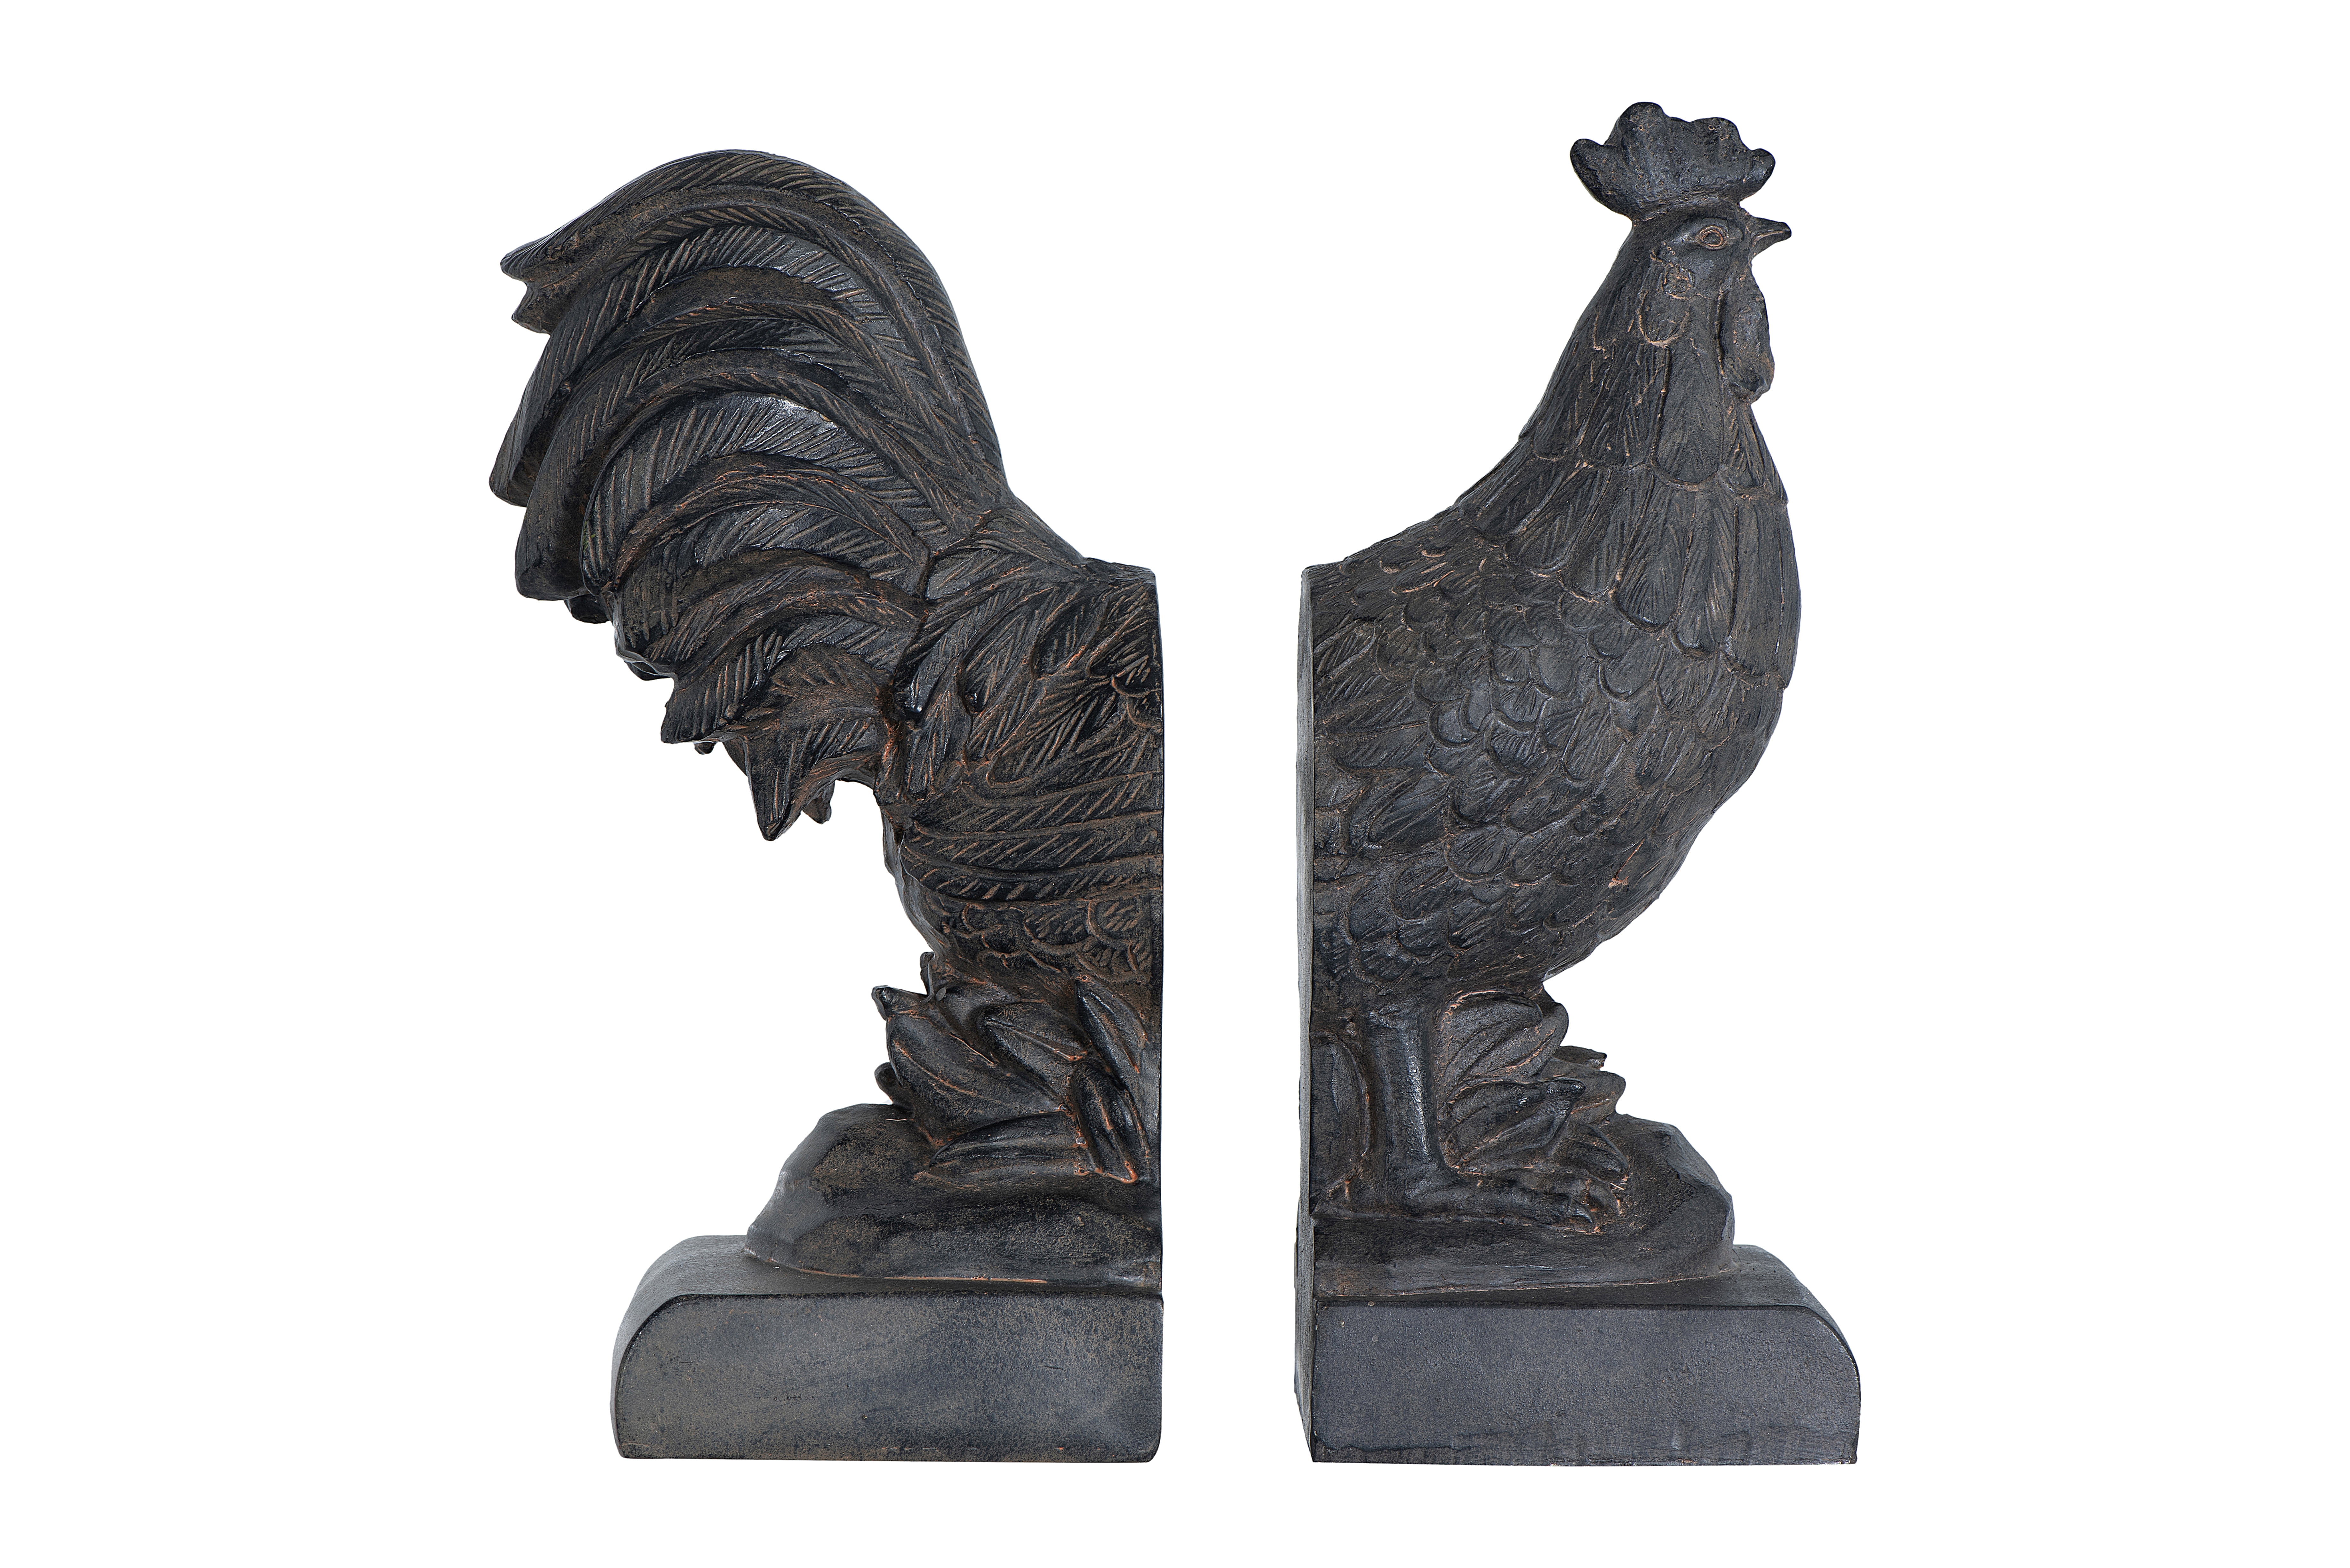 Colorful Cast Iron Painted Rooster Bookends Set 8" tall 0170-04408 